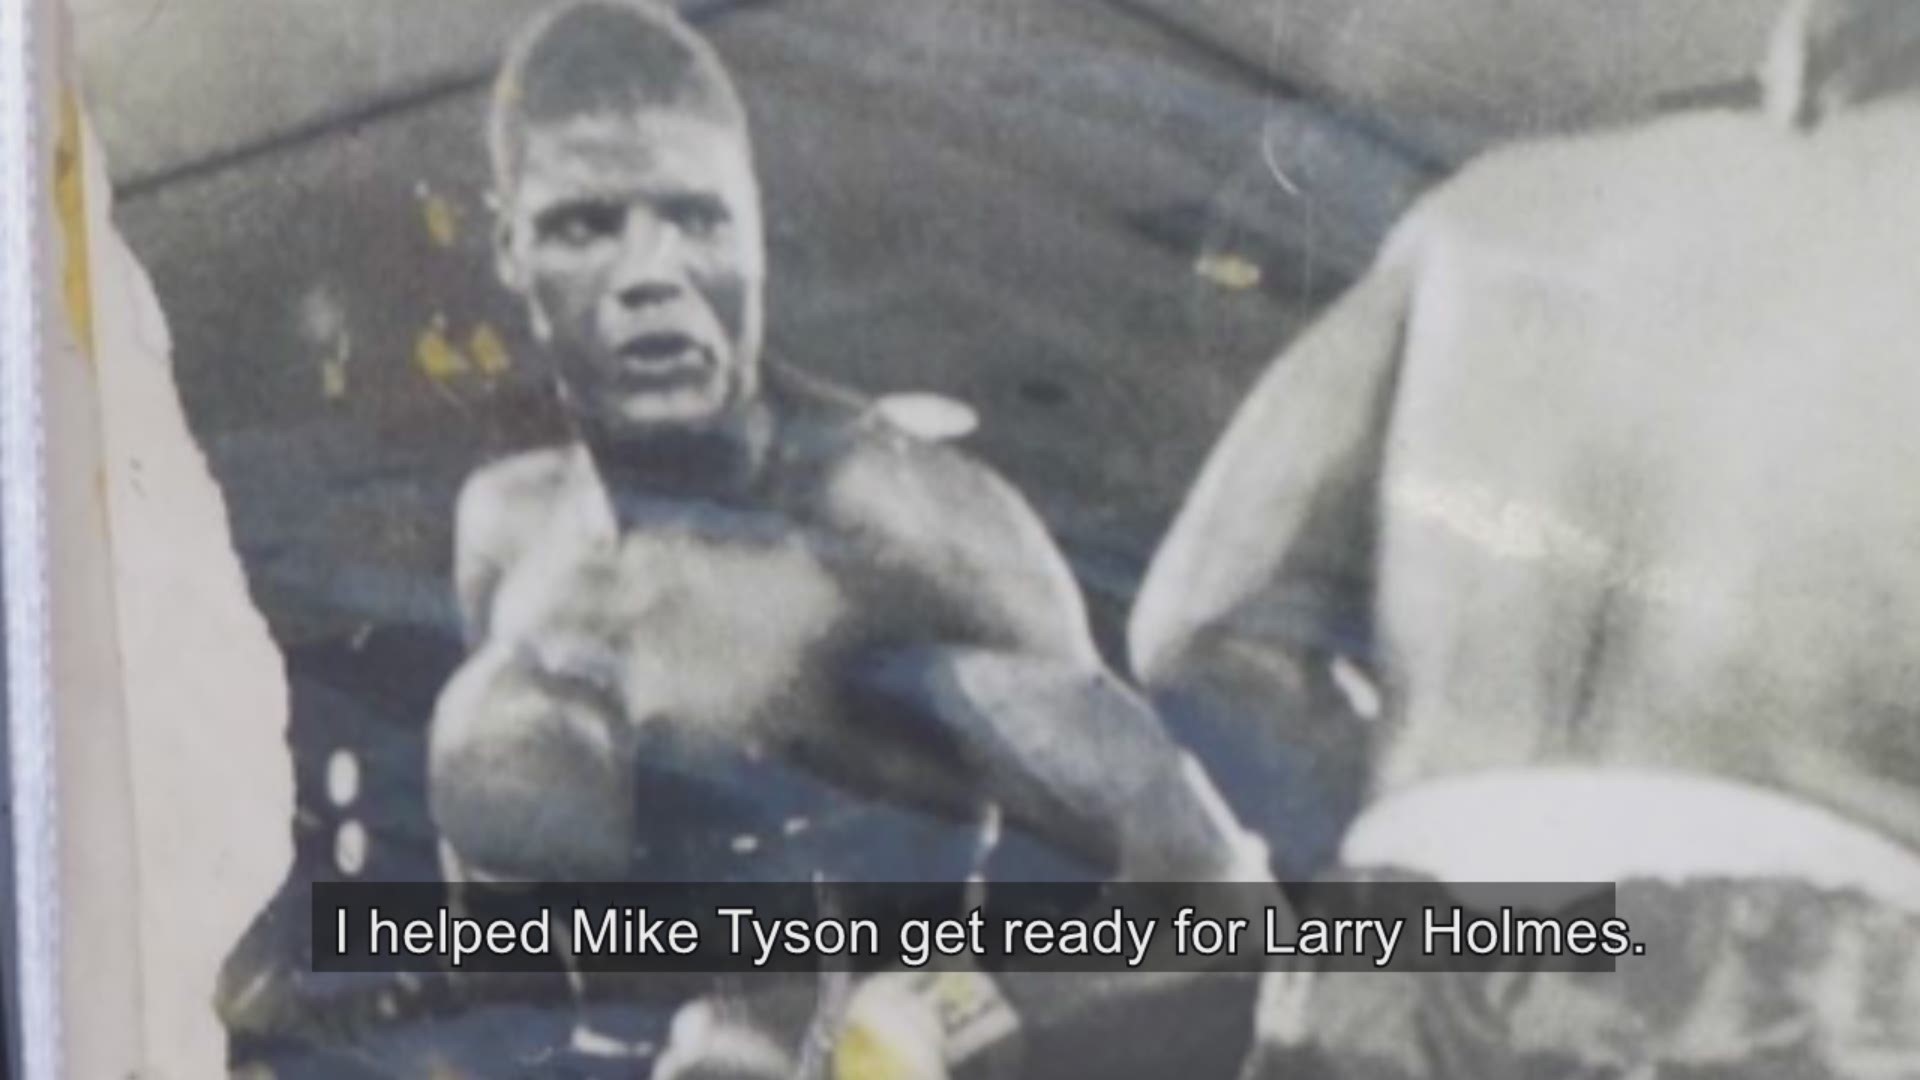 Retired boxer Dorcy Gaymon used to spar with Mike Tyson and Tony Tucker in preparation for some of the biggest fights of their careers. He now lives in Jacksonville, where he loves to tell his story to any who will listen.